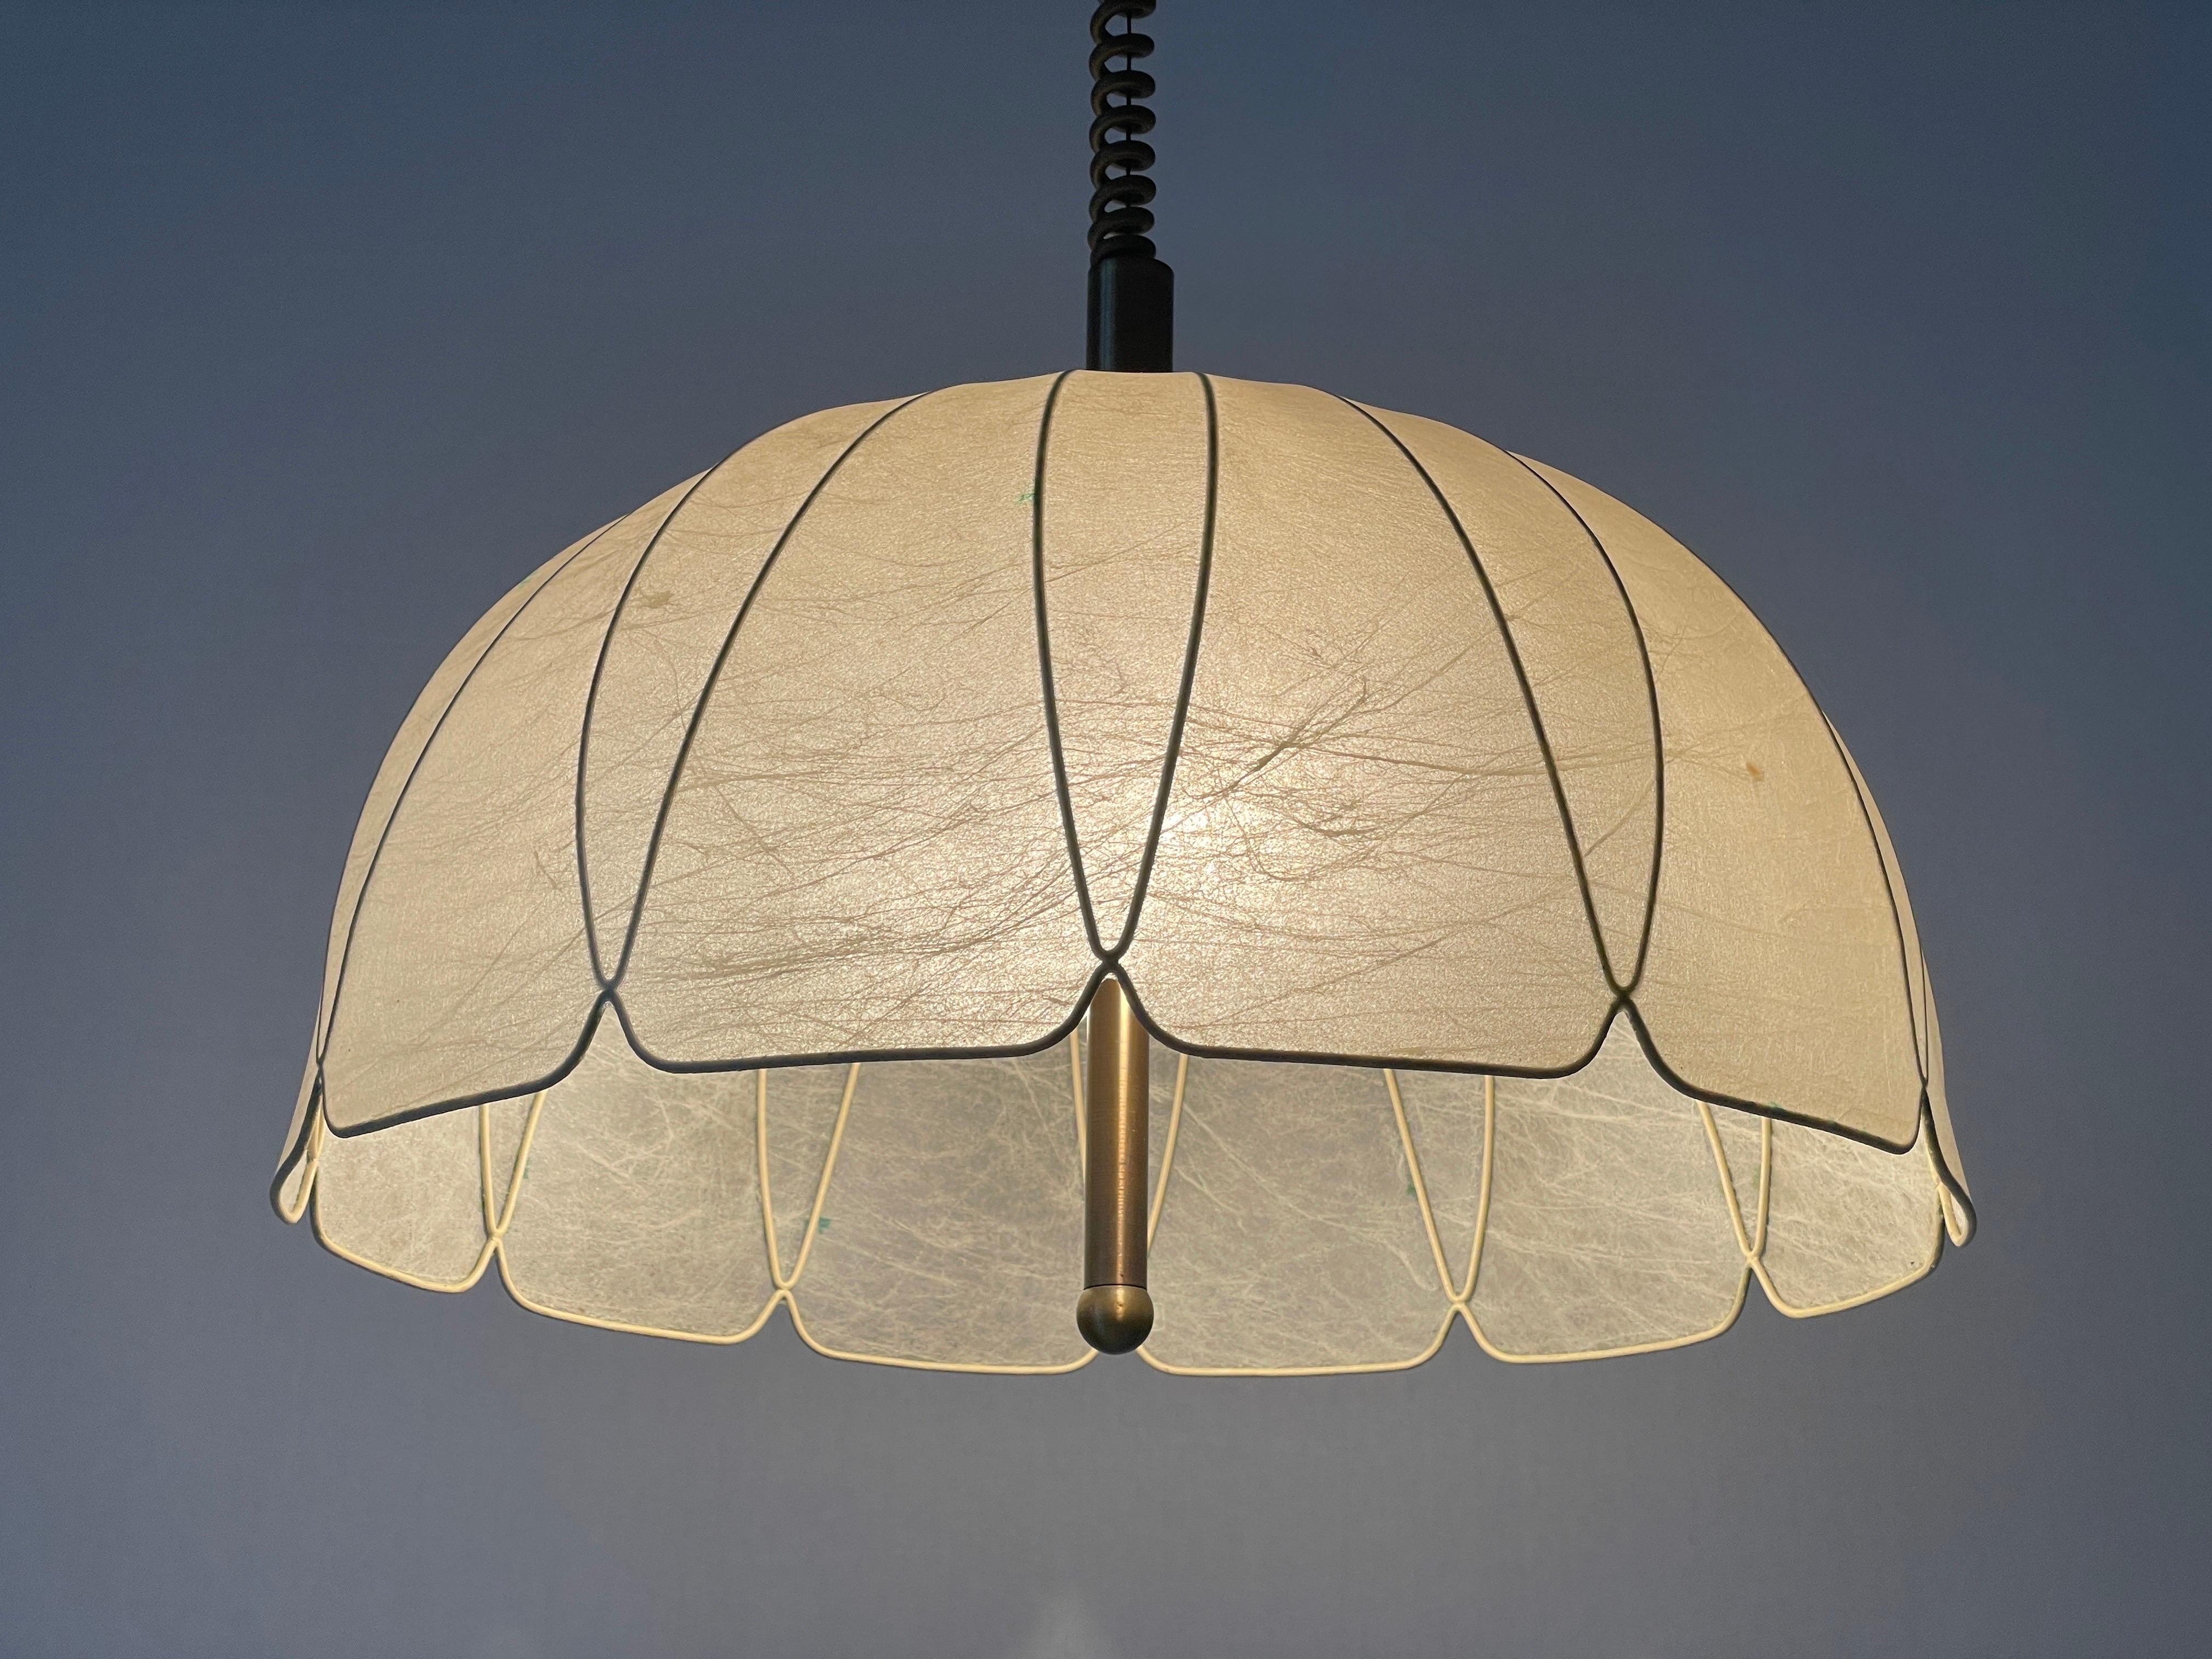 Flower Design Cocoon Adjustable Height Pendant Lamp by Goldkant, 1960s, Germany For Sale 4